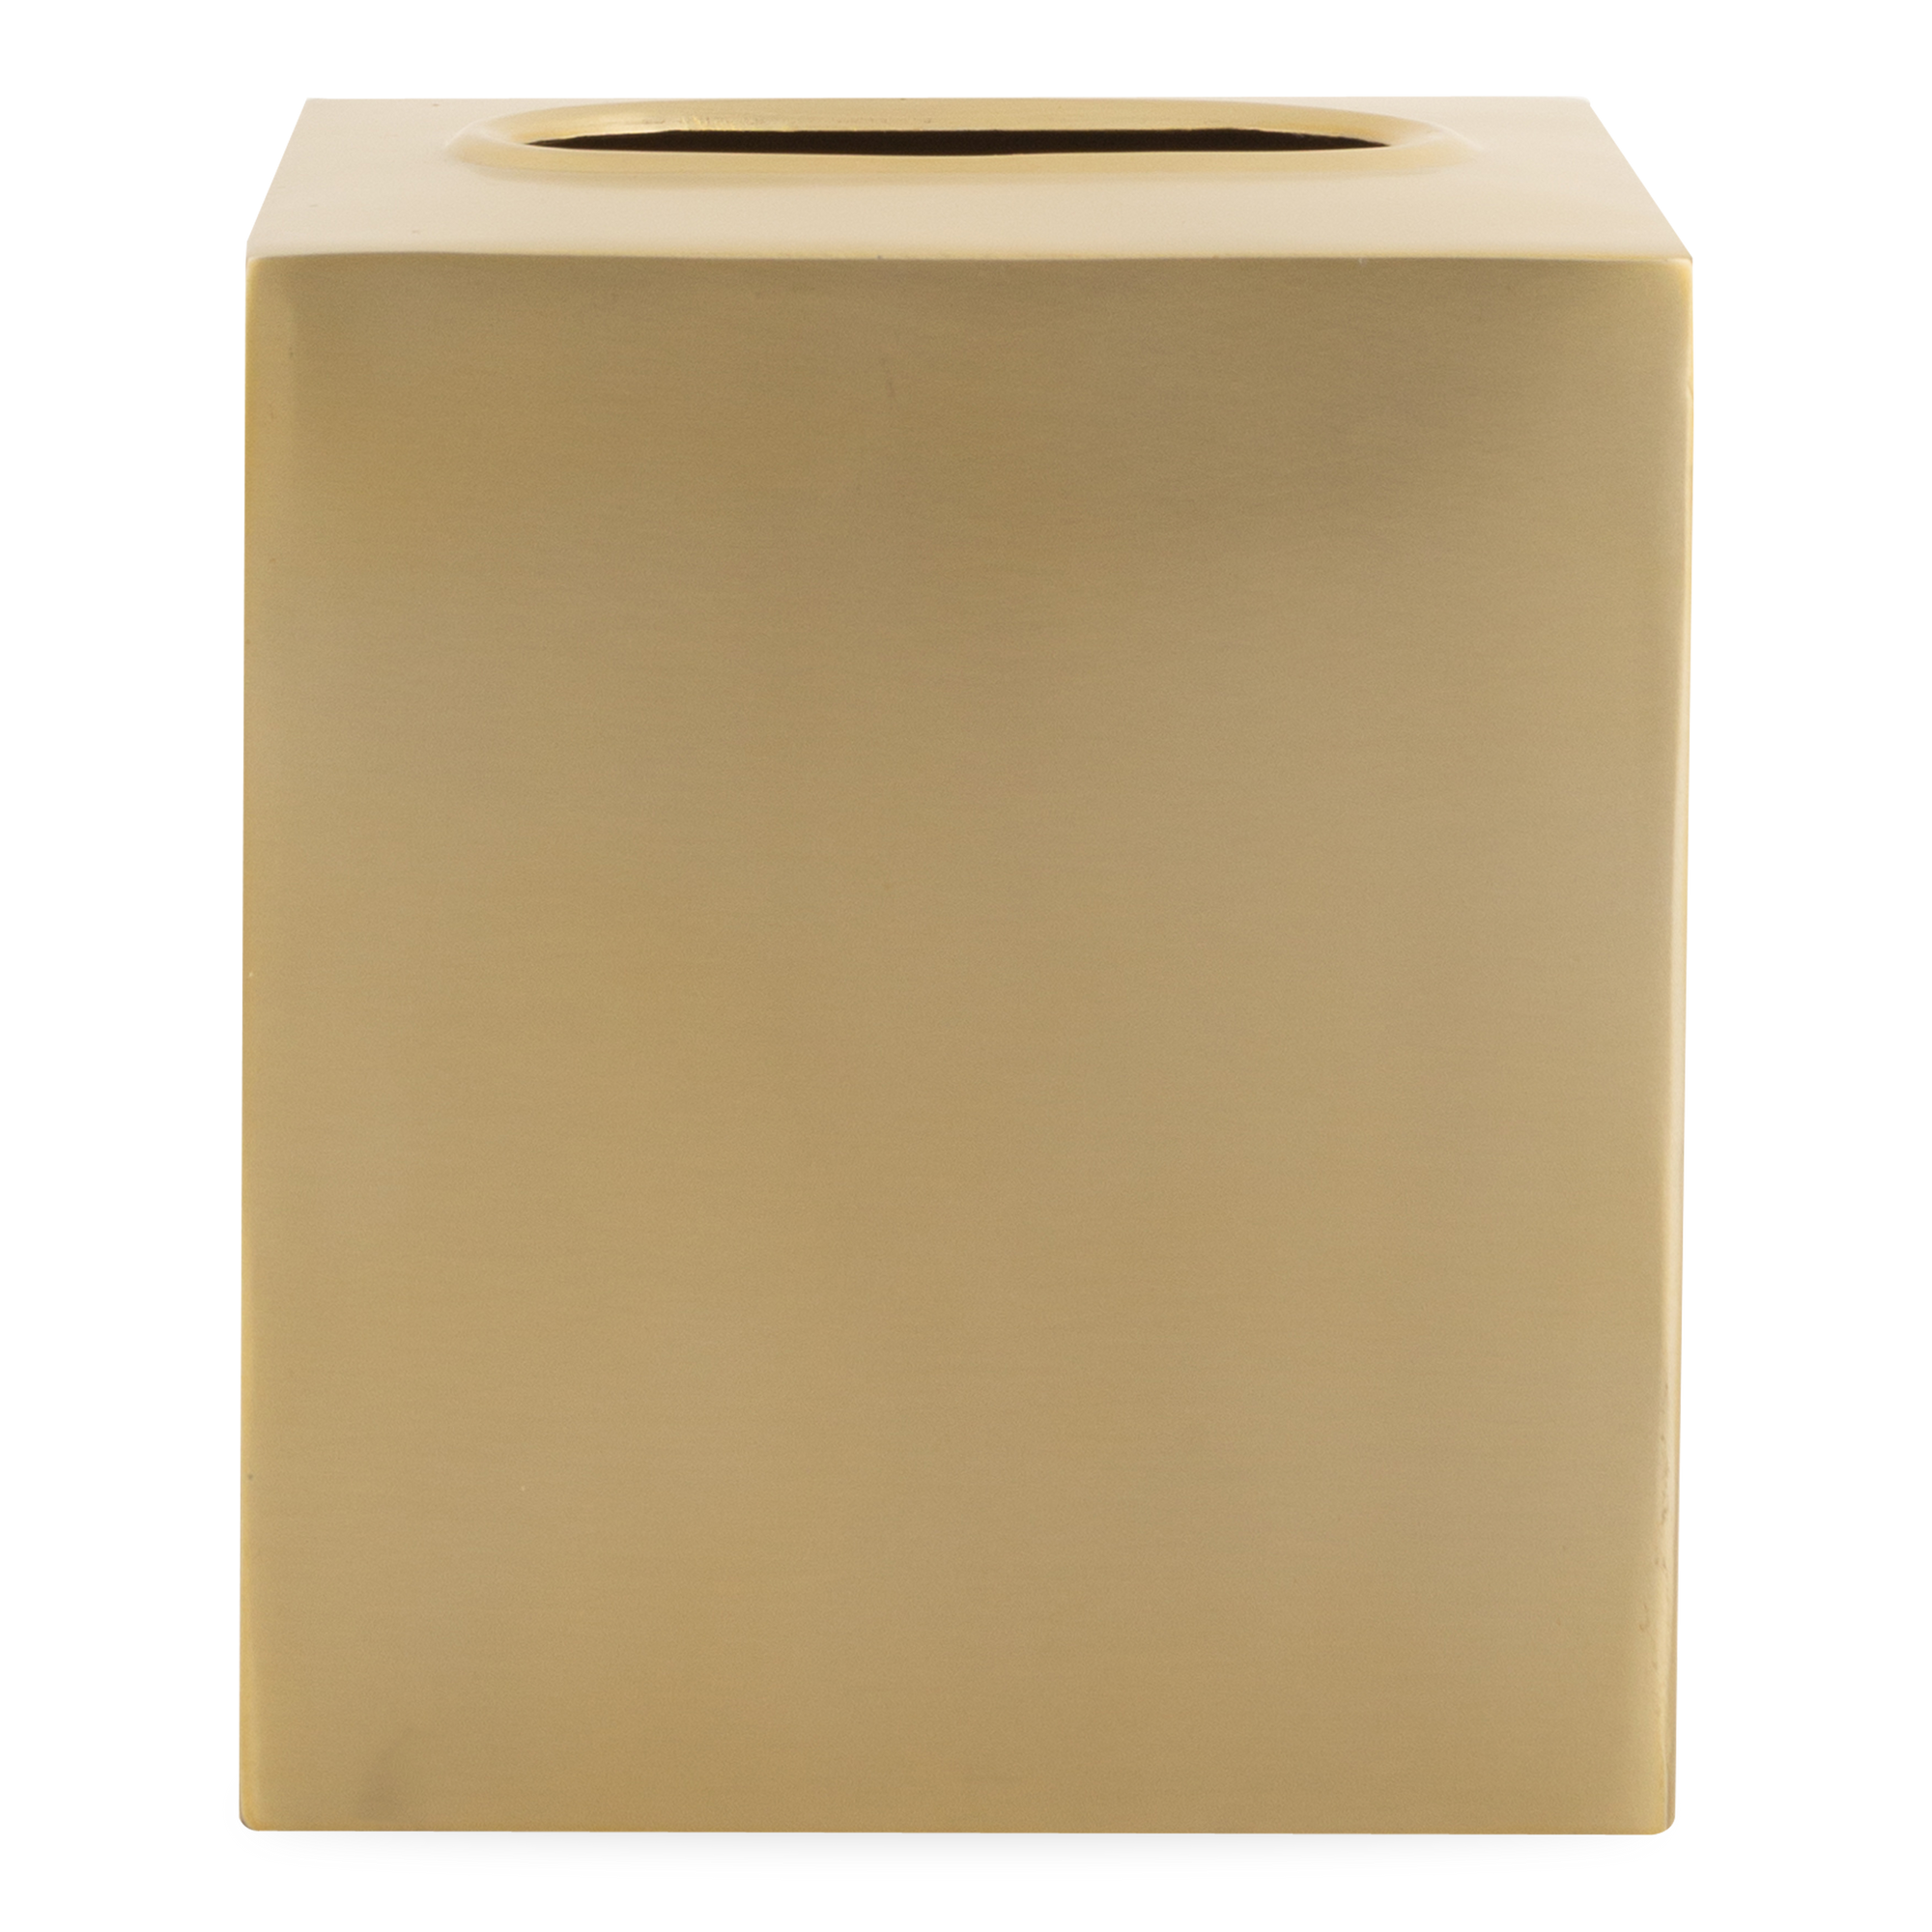 Characterized by its clean design and sleek silhouettes, the Essential Collection features an effortlessly elegant matte brass finish that will elevate any bathroom or kitchen coun